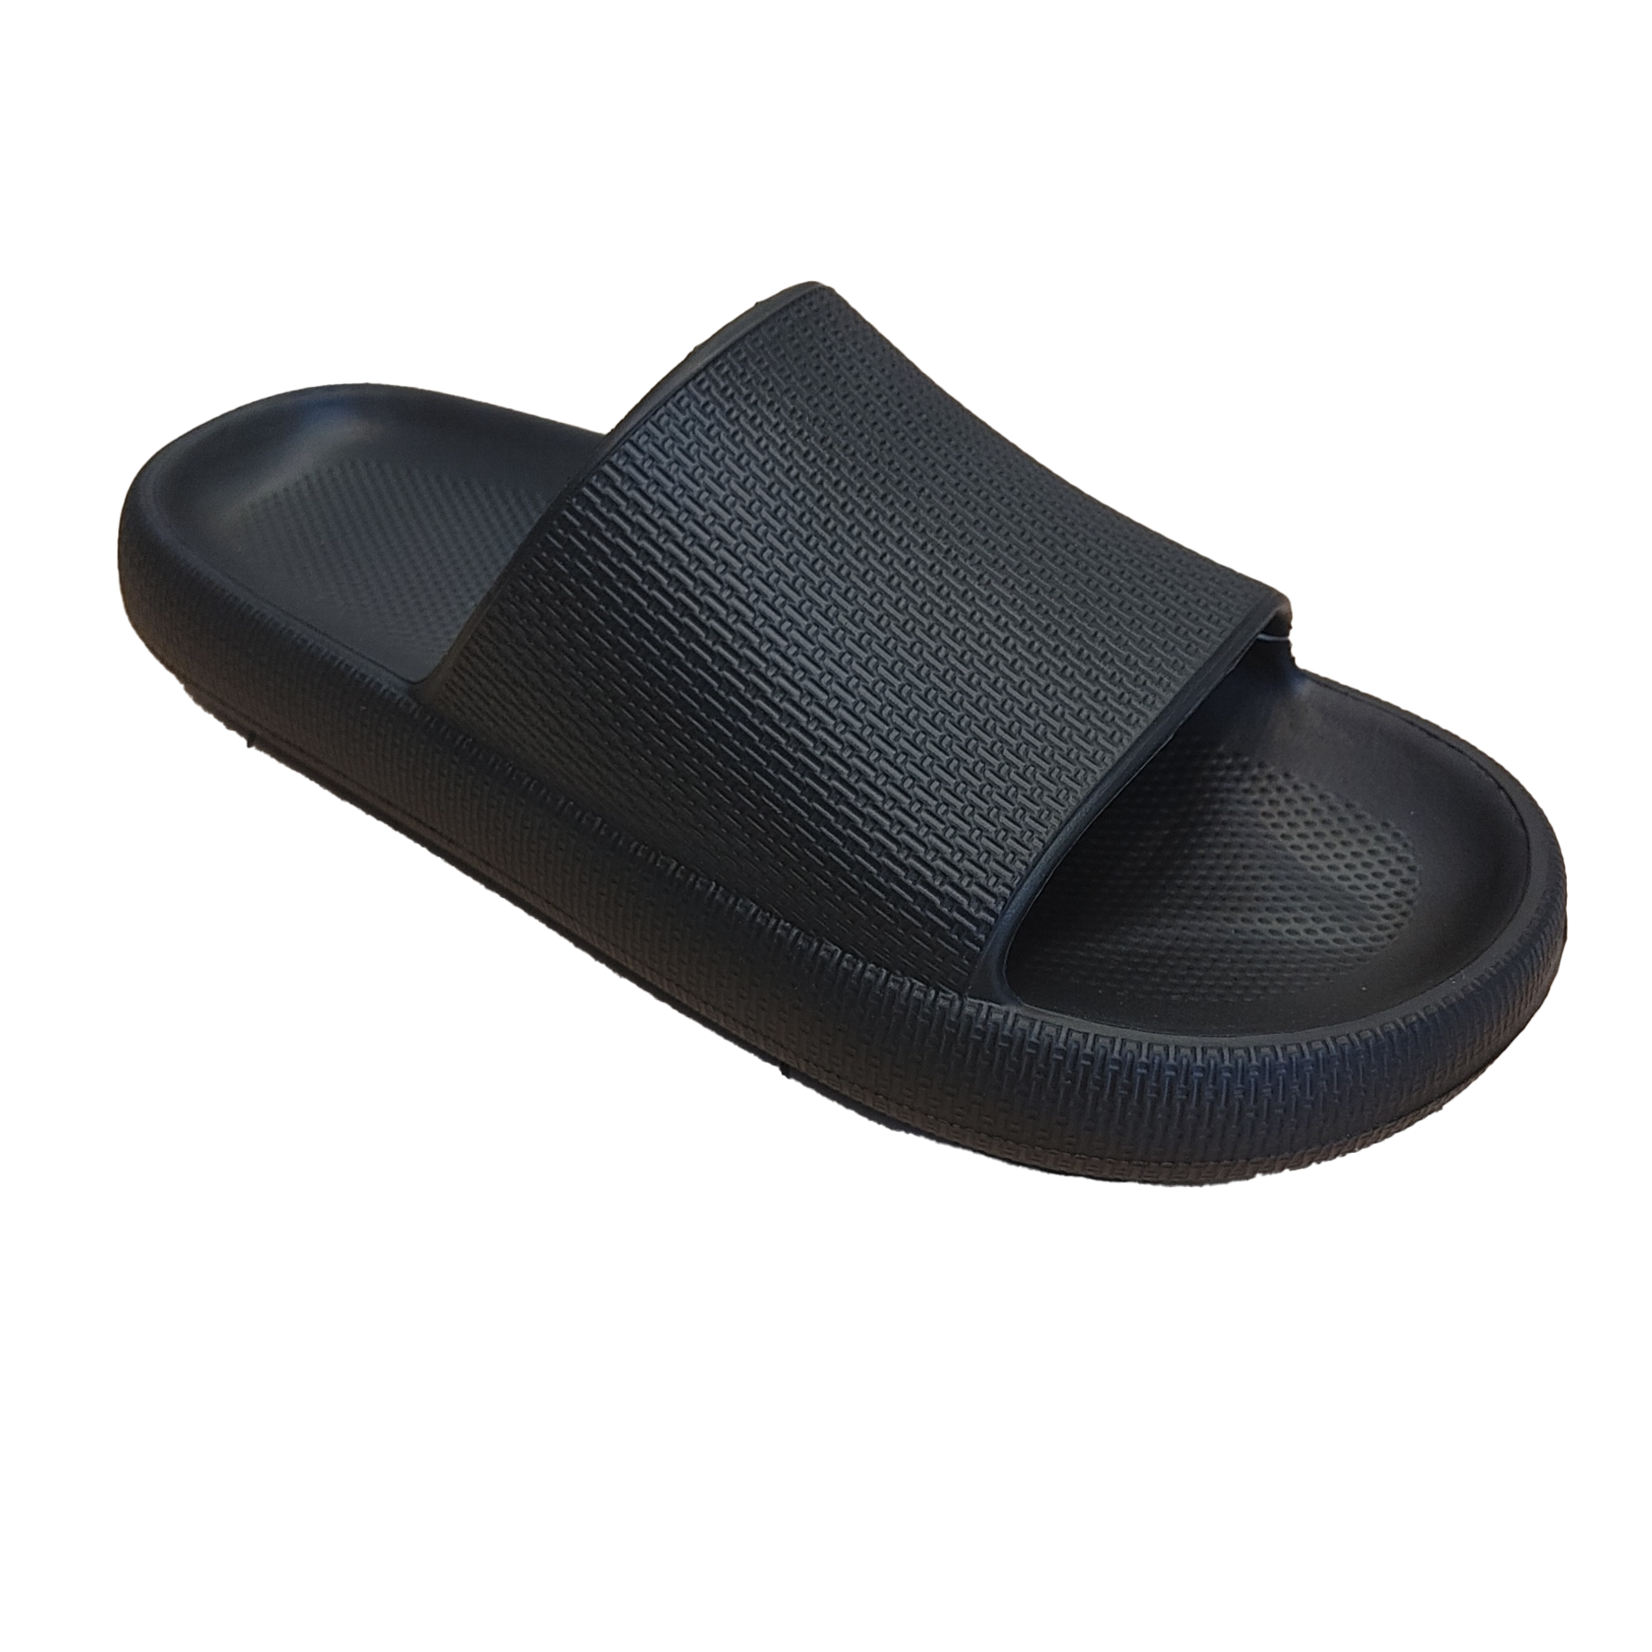 NYC NYC thick sole slip on sandal, sandals, water shoe